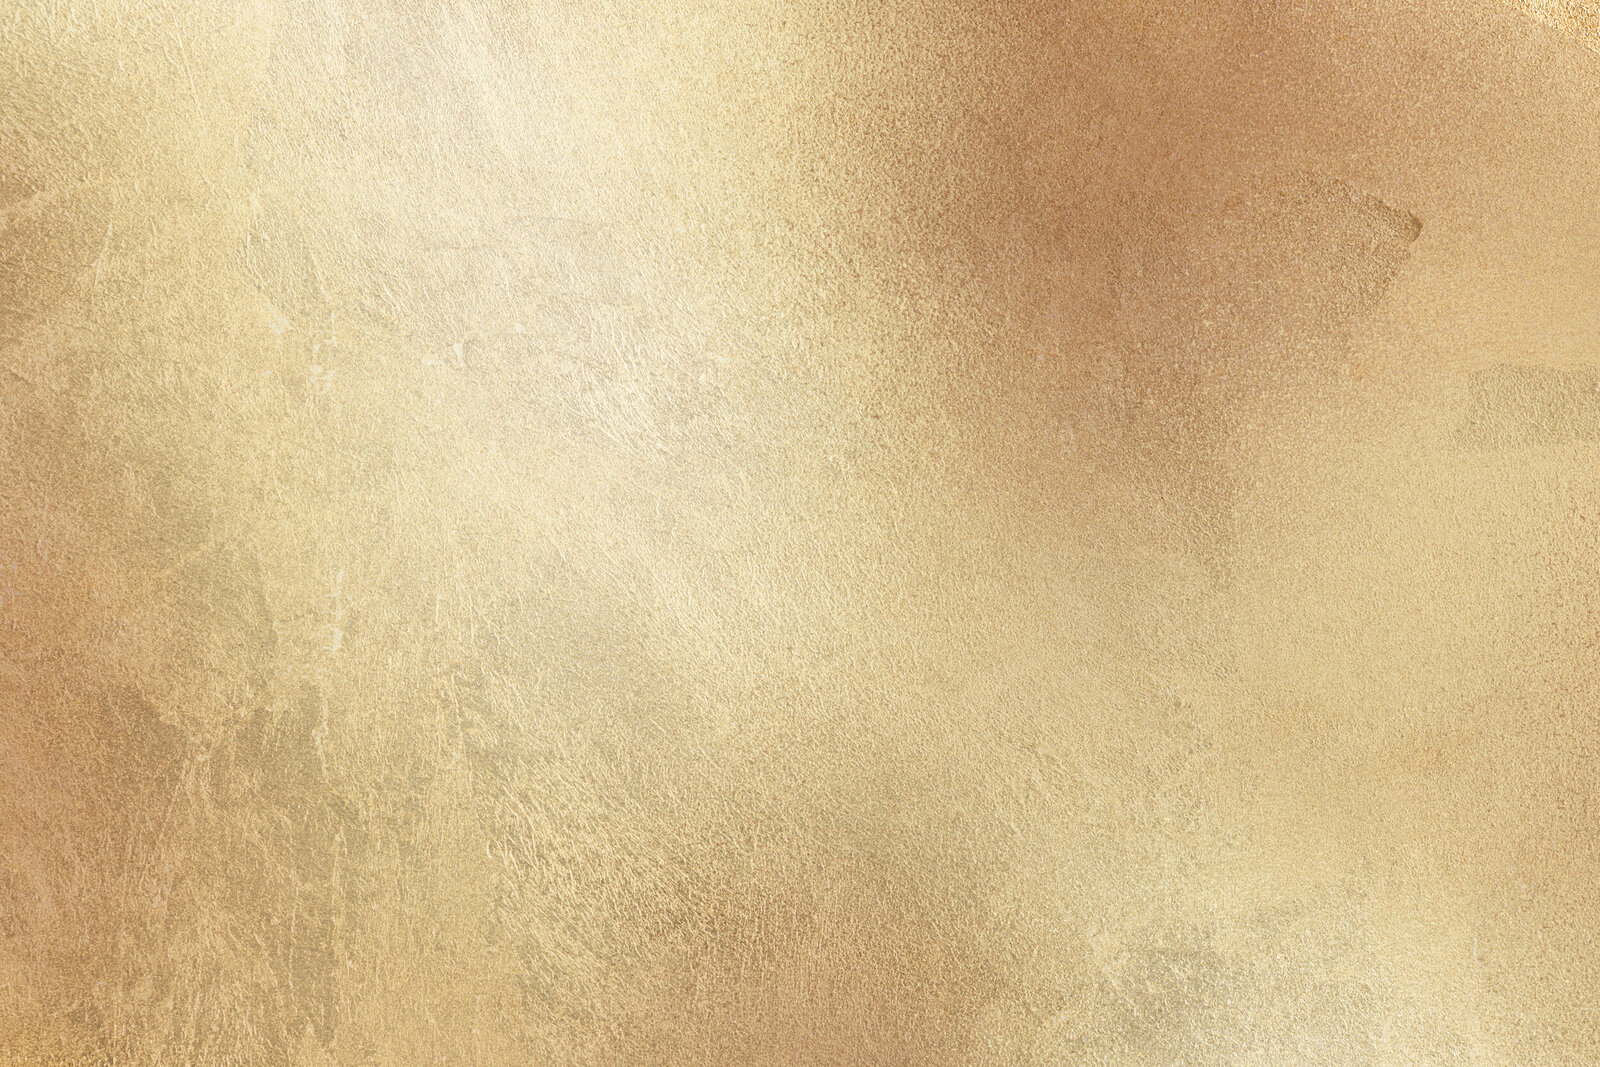 Pale gold background